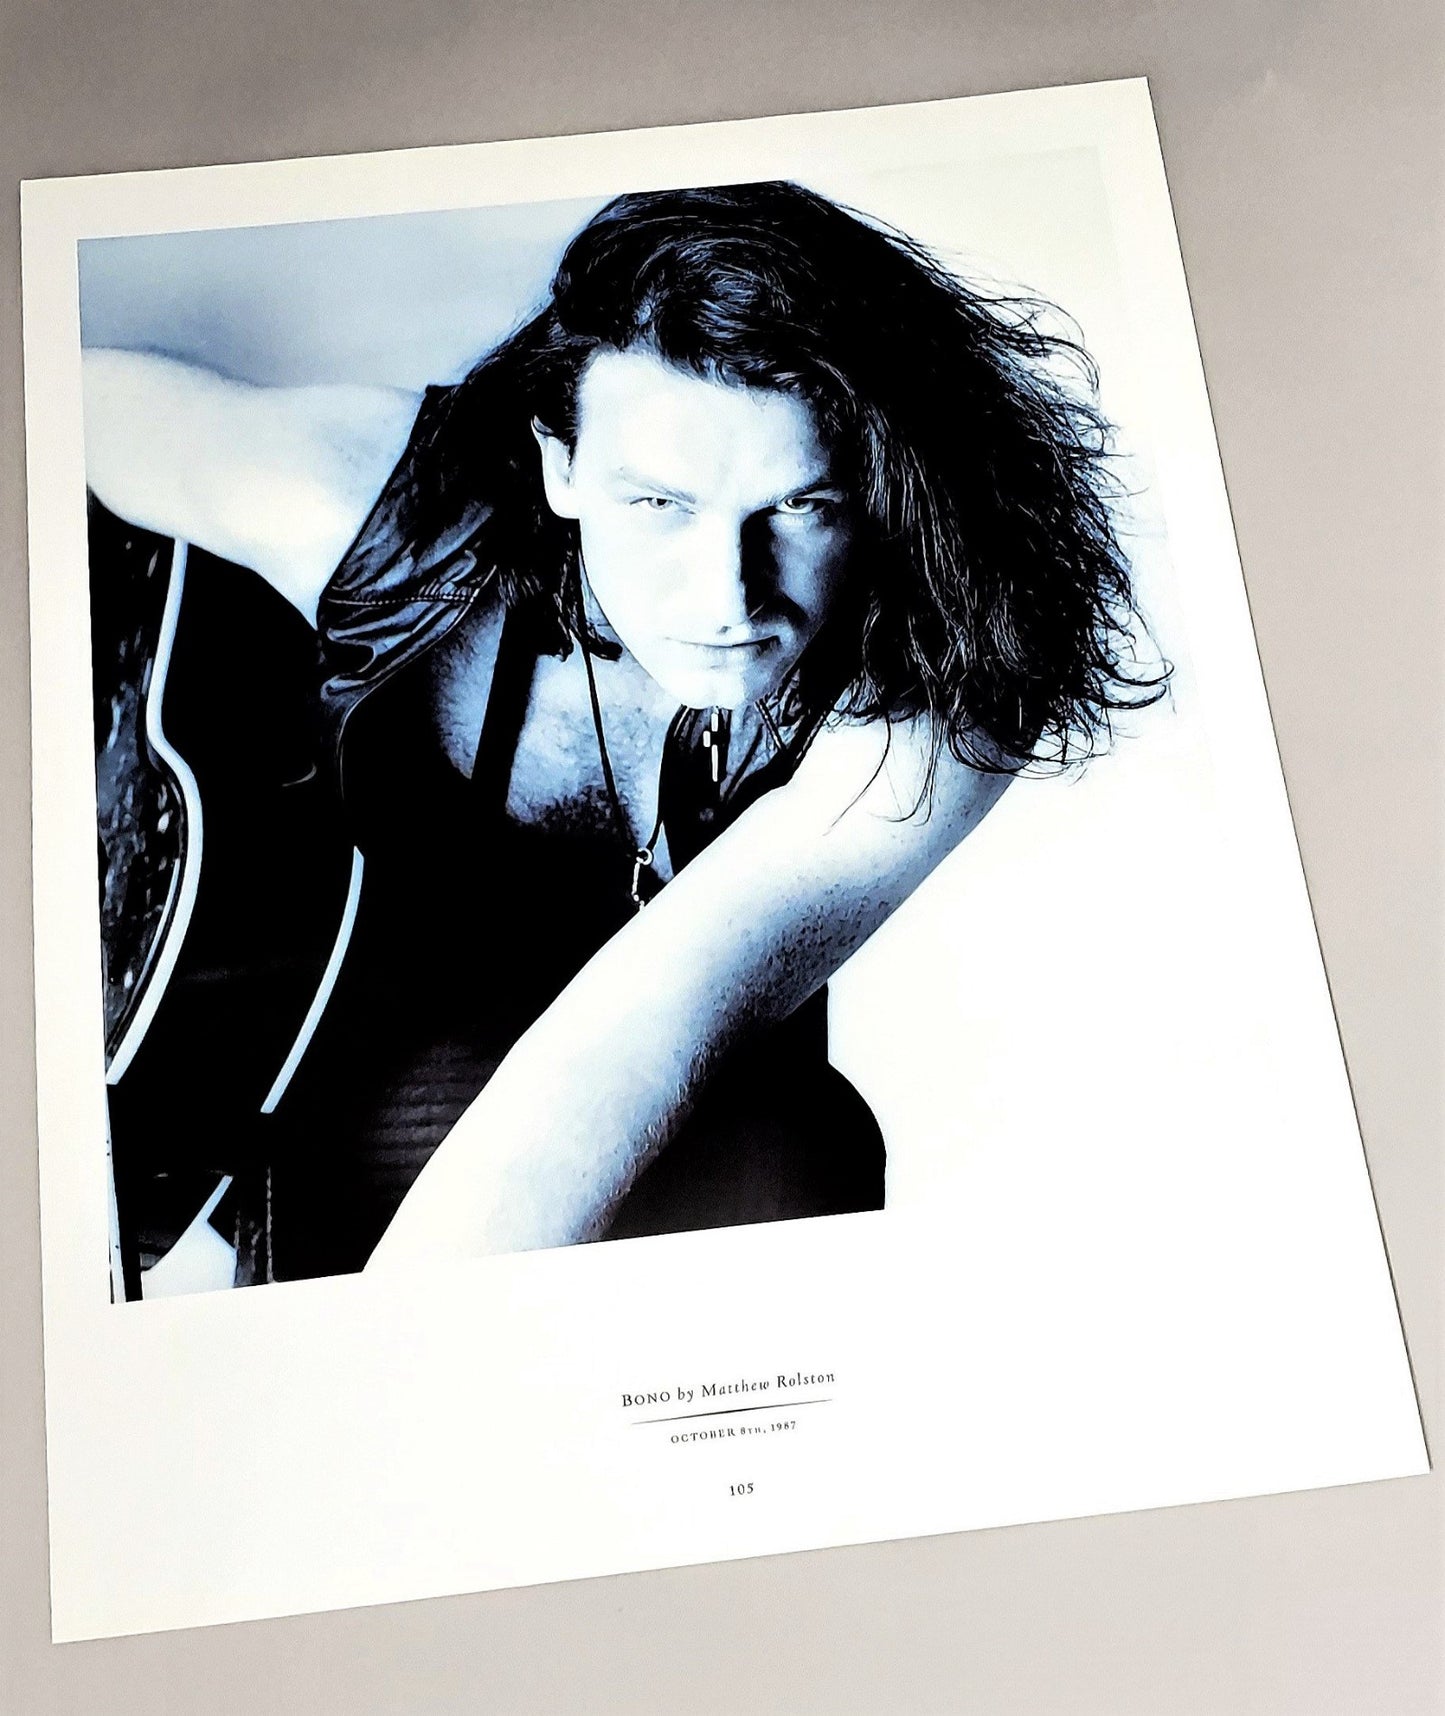 Vintage photograph page of Bono photographed by Matthew Rolston in 1984